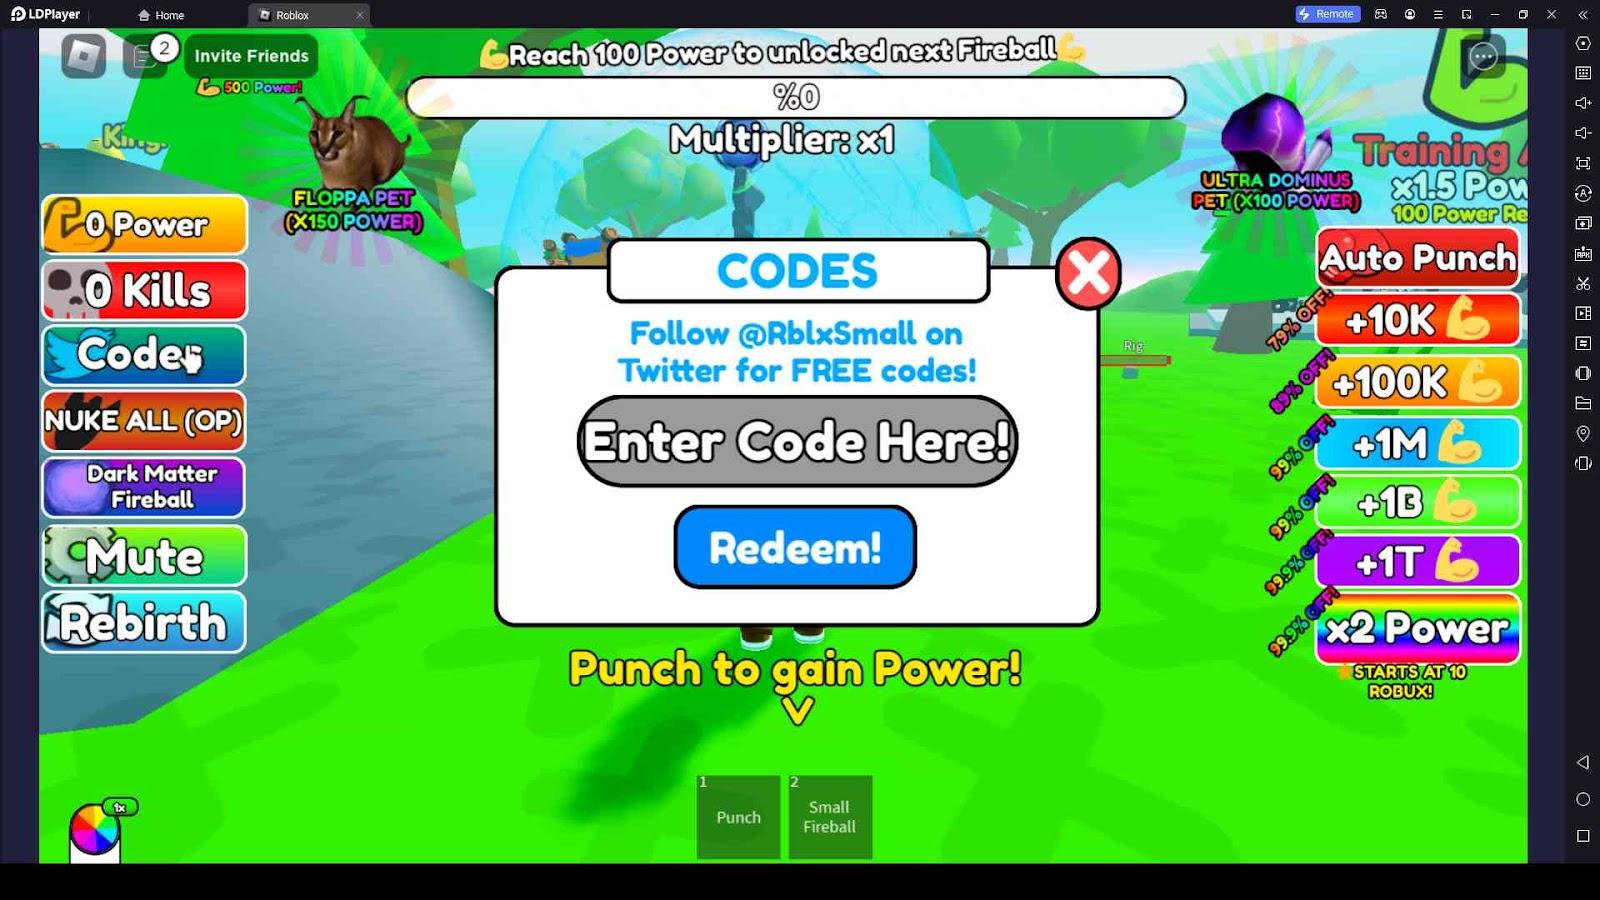 Roblox Fireball Punching Simulator Codes to Advance Fast in the